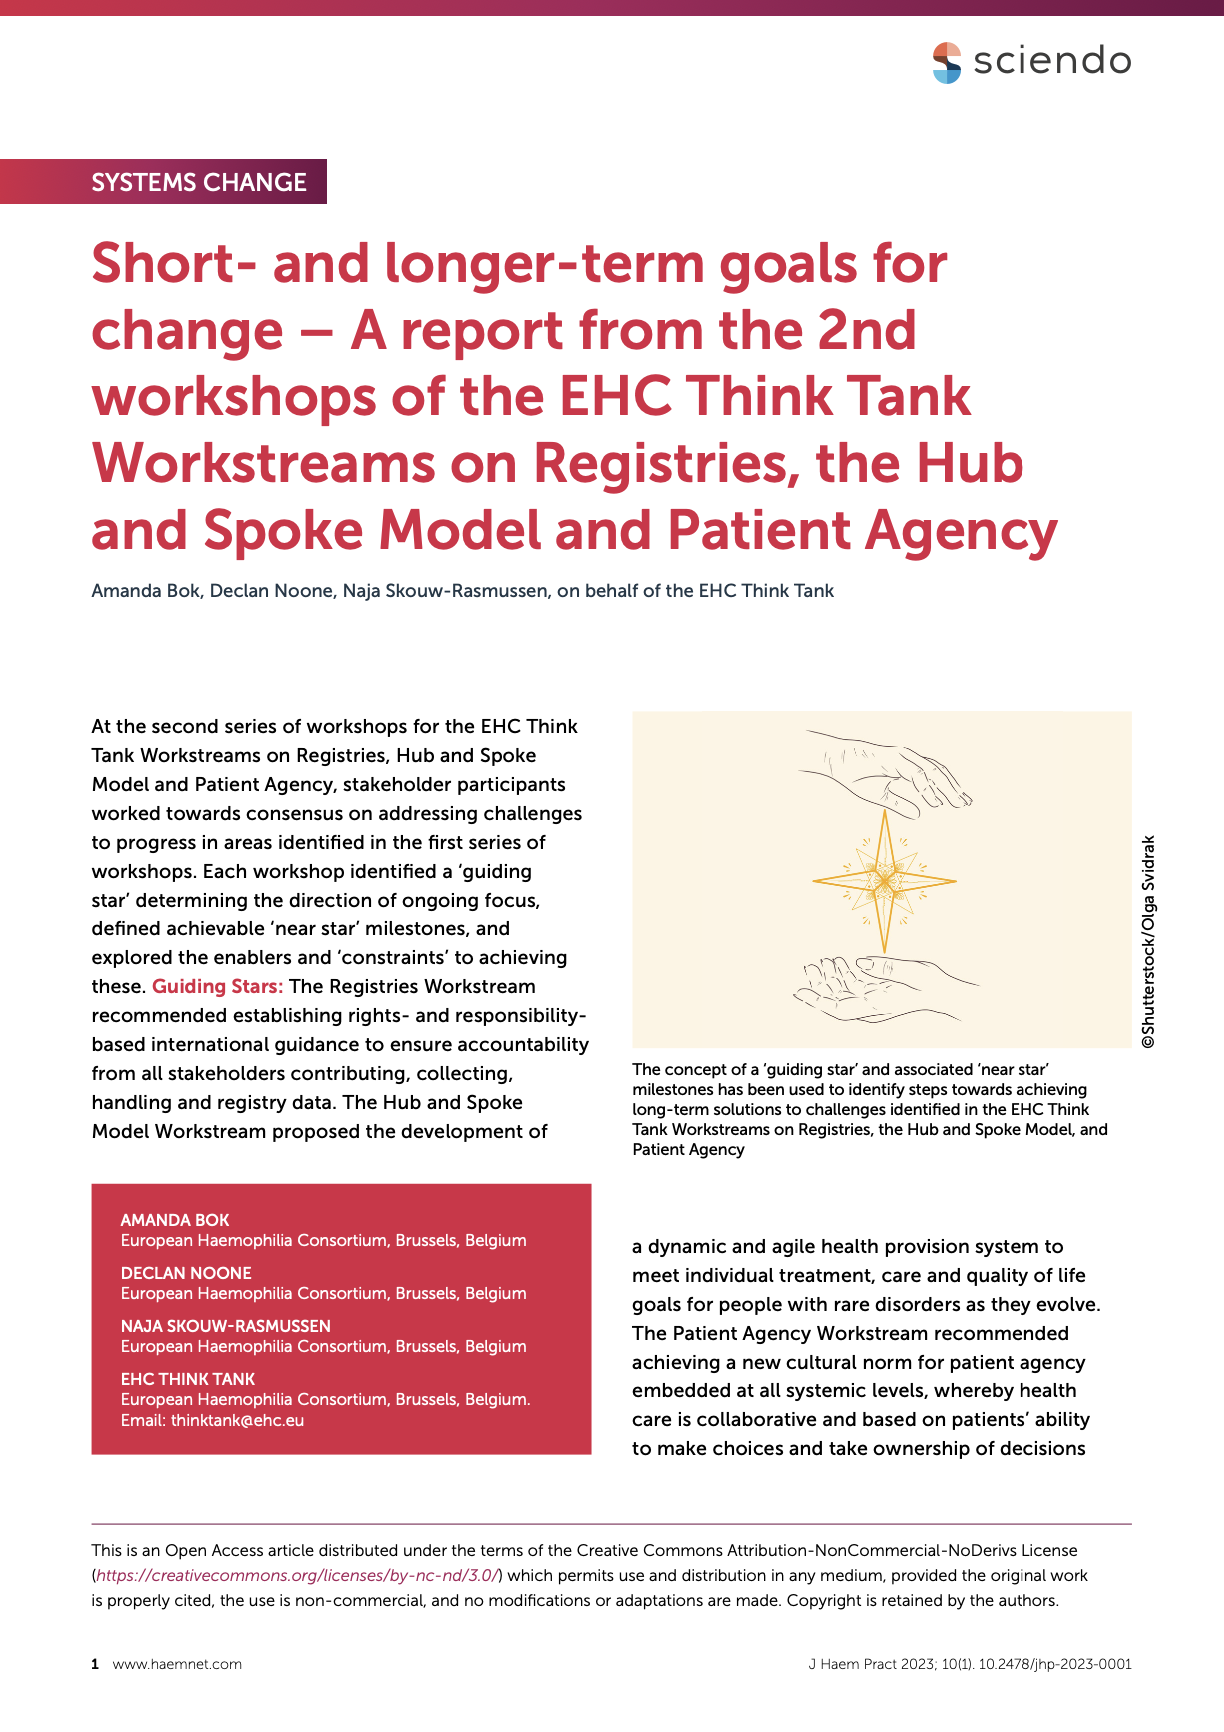 Published paper – Report from the 2nd workshops of the Workstreams on Registries, the Hub and Spoke Model and Patient Agency